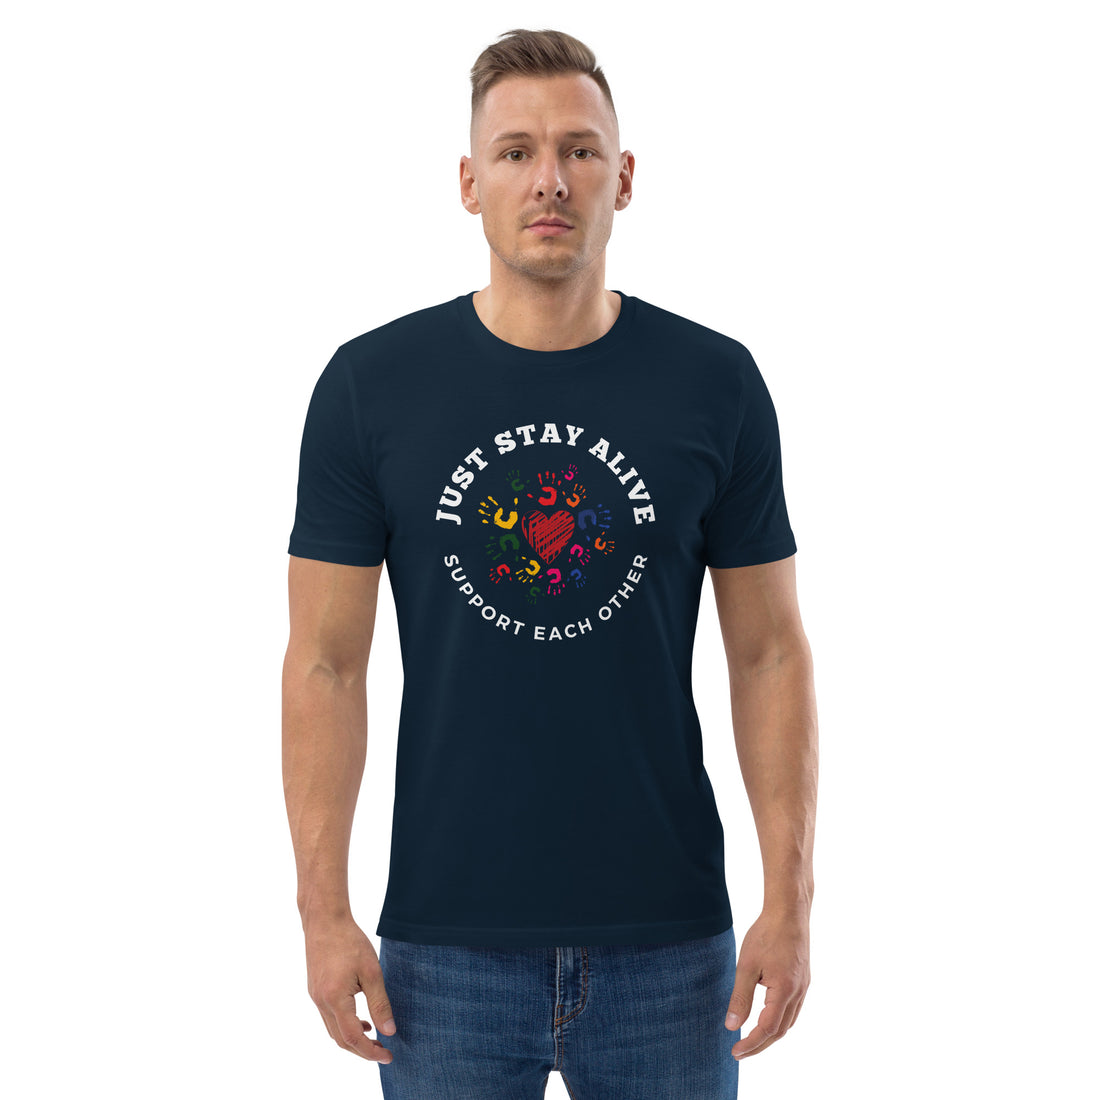 Human Right Support T-shirt